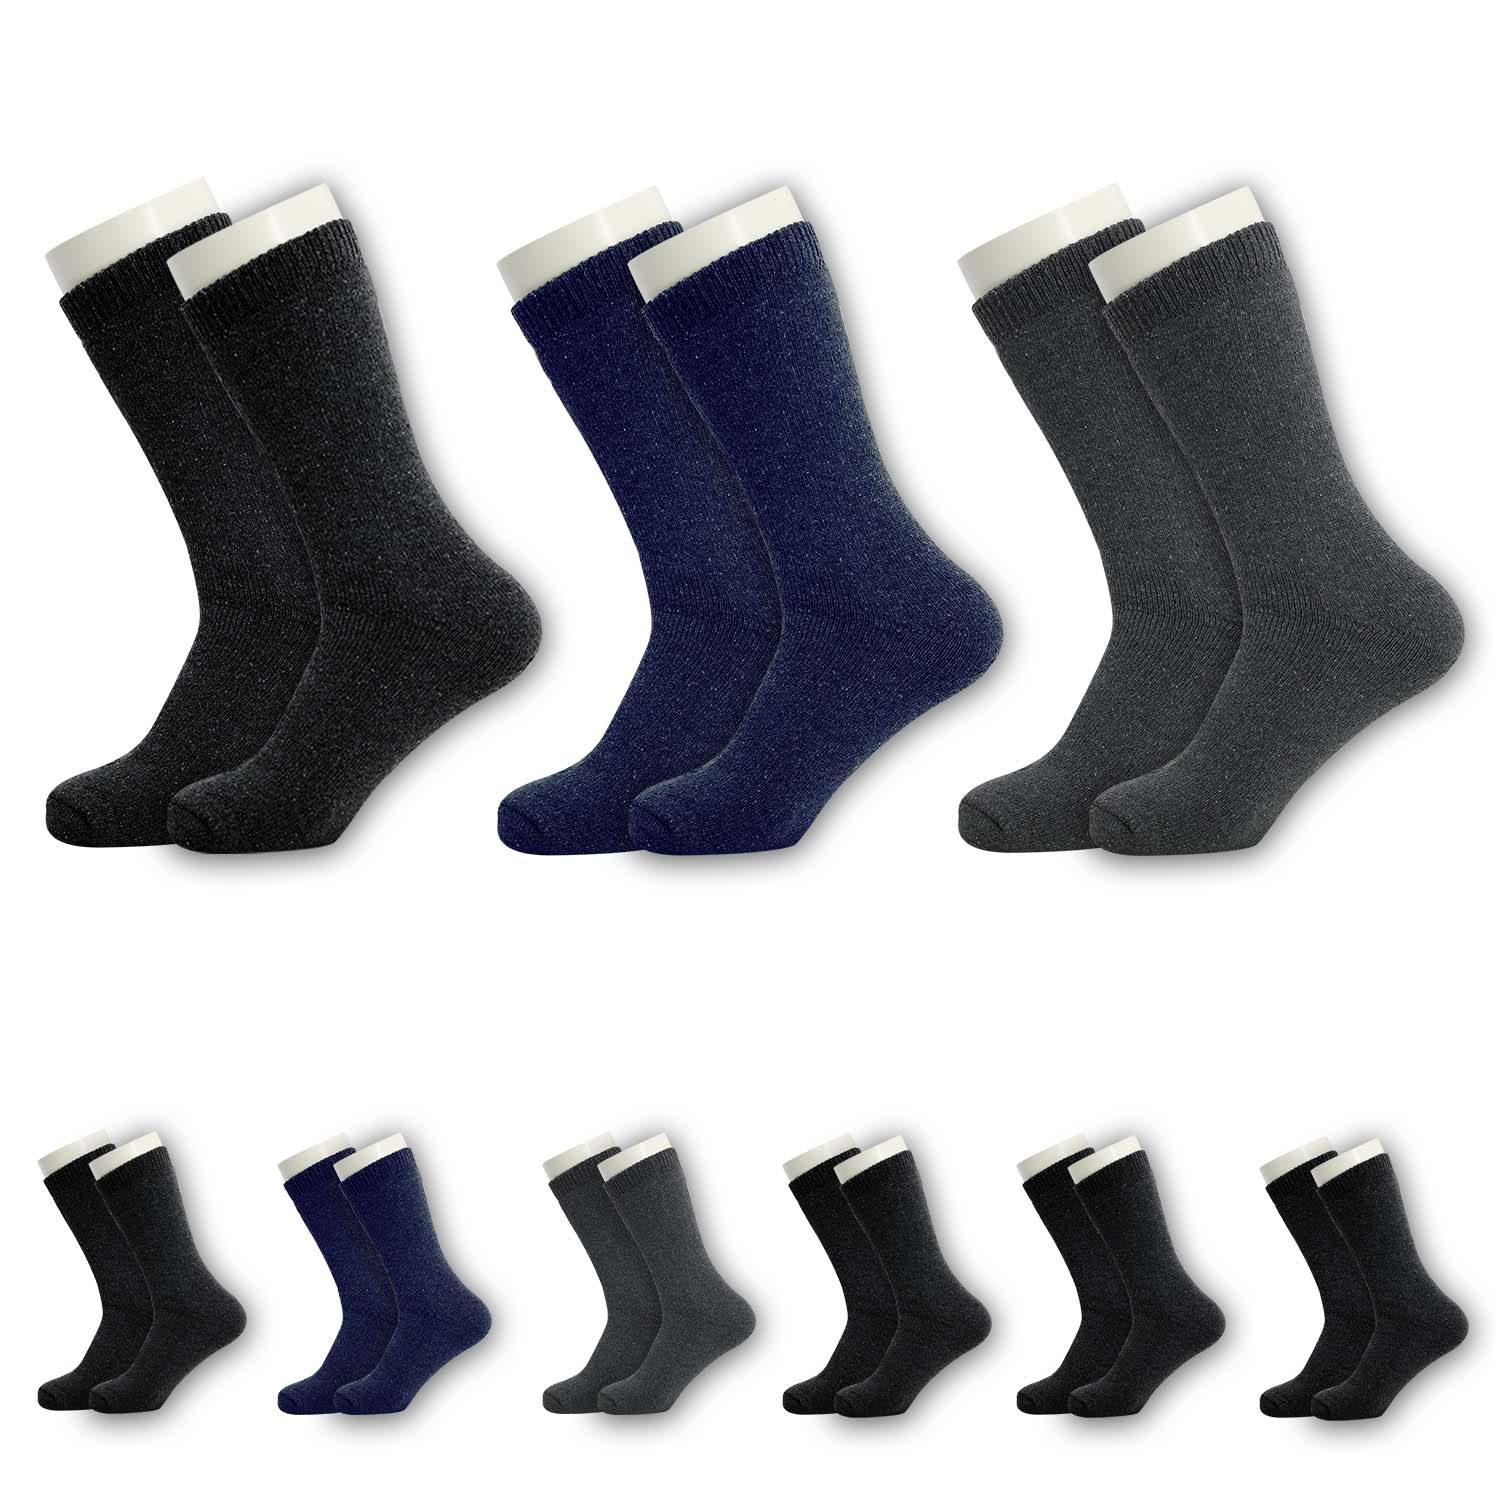 Unisex Crew Wholesale Thermal Sock, Size 9-13 in 3 Assorted Colors - B